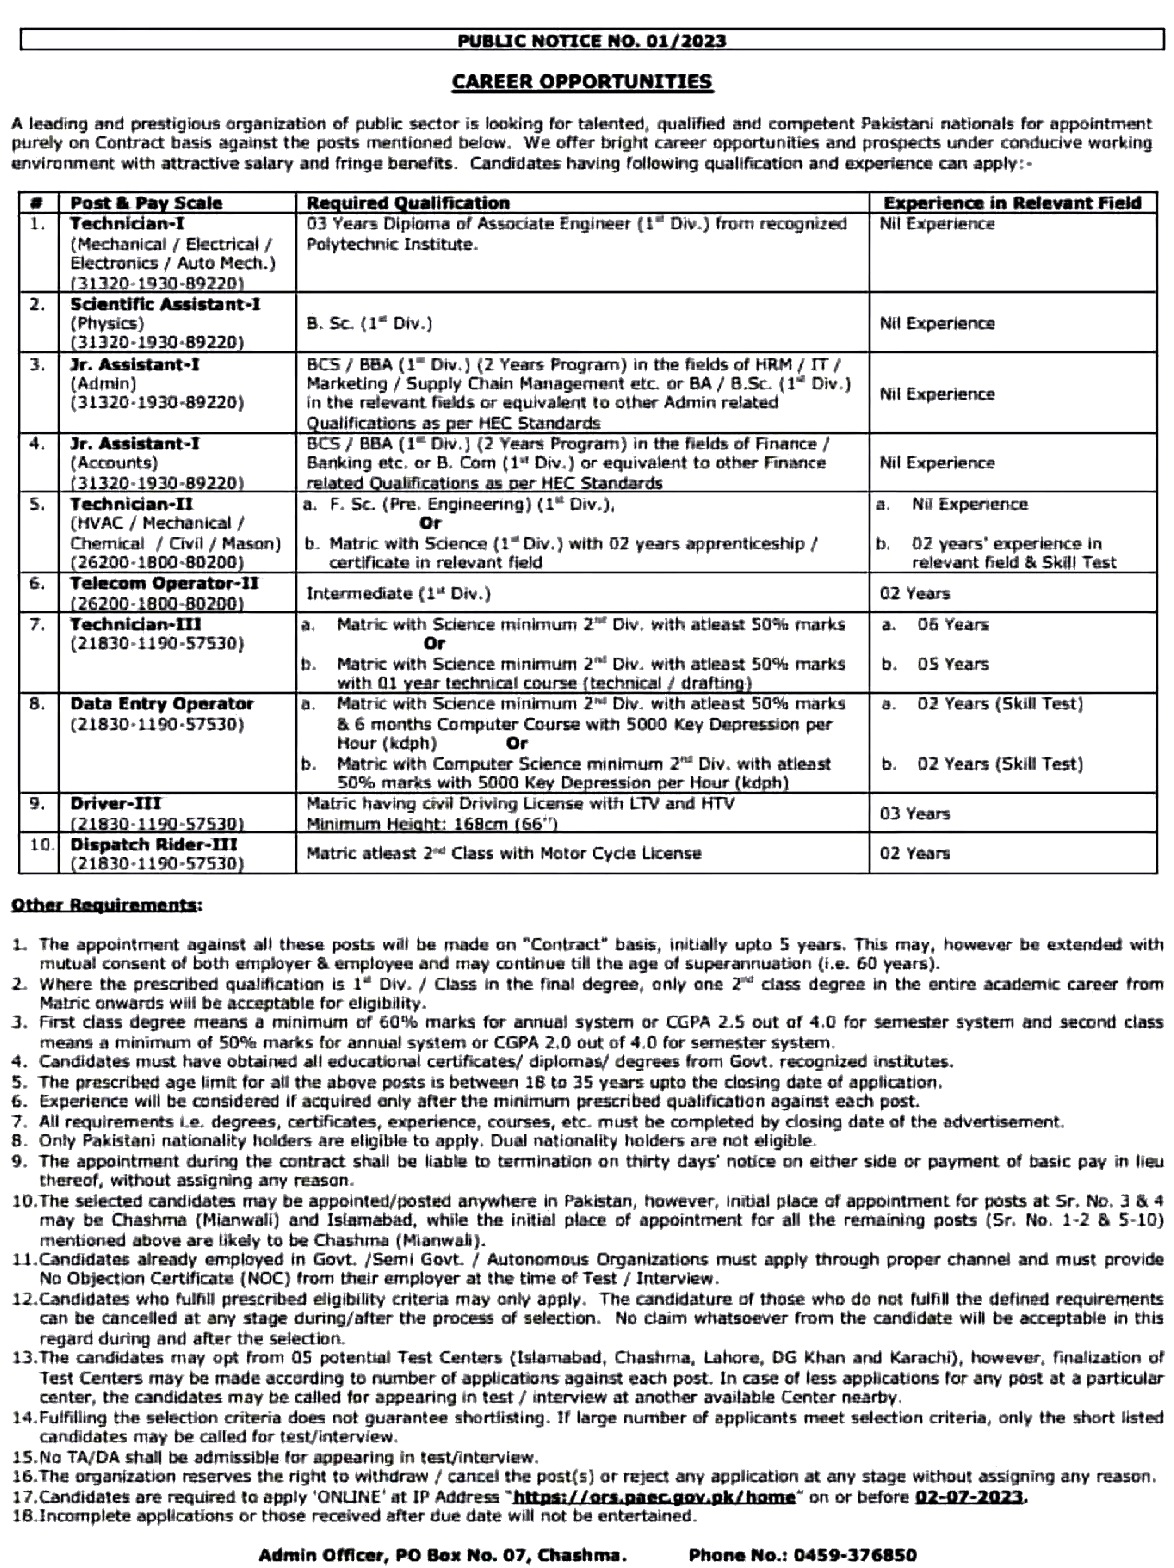 Pakistan Atomic Energy Commission (Chashma – Mianwali) Jobs 2023 | Apply Online